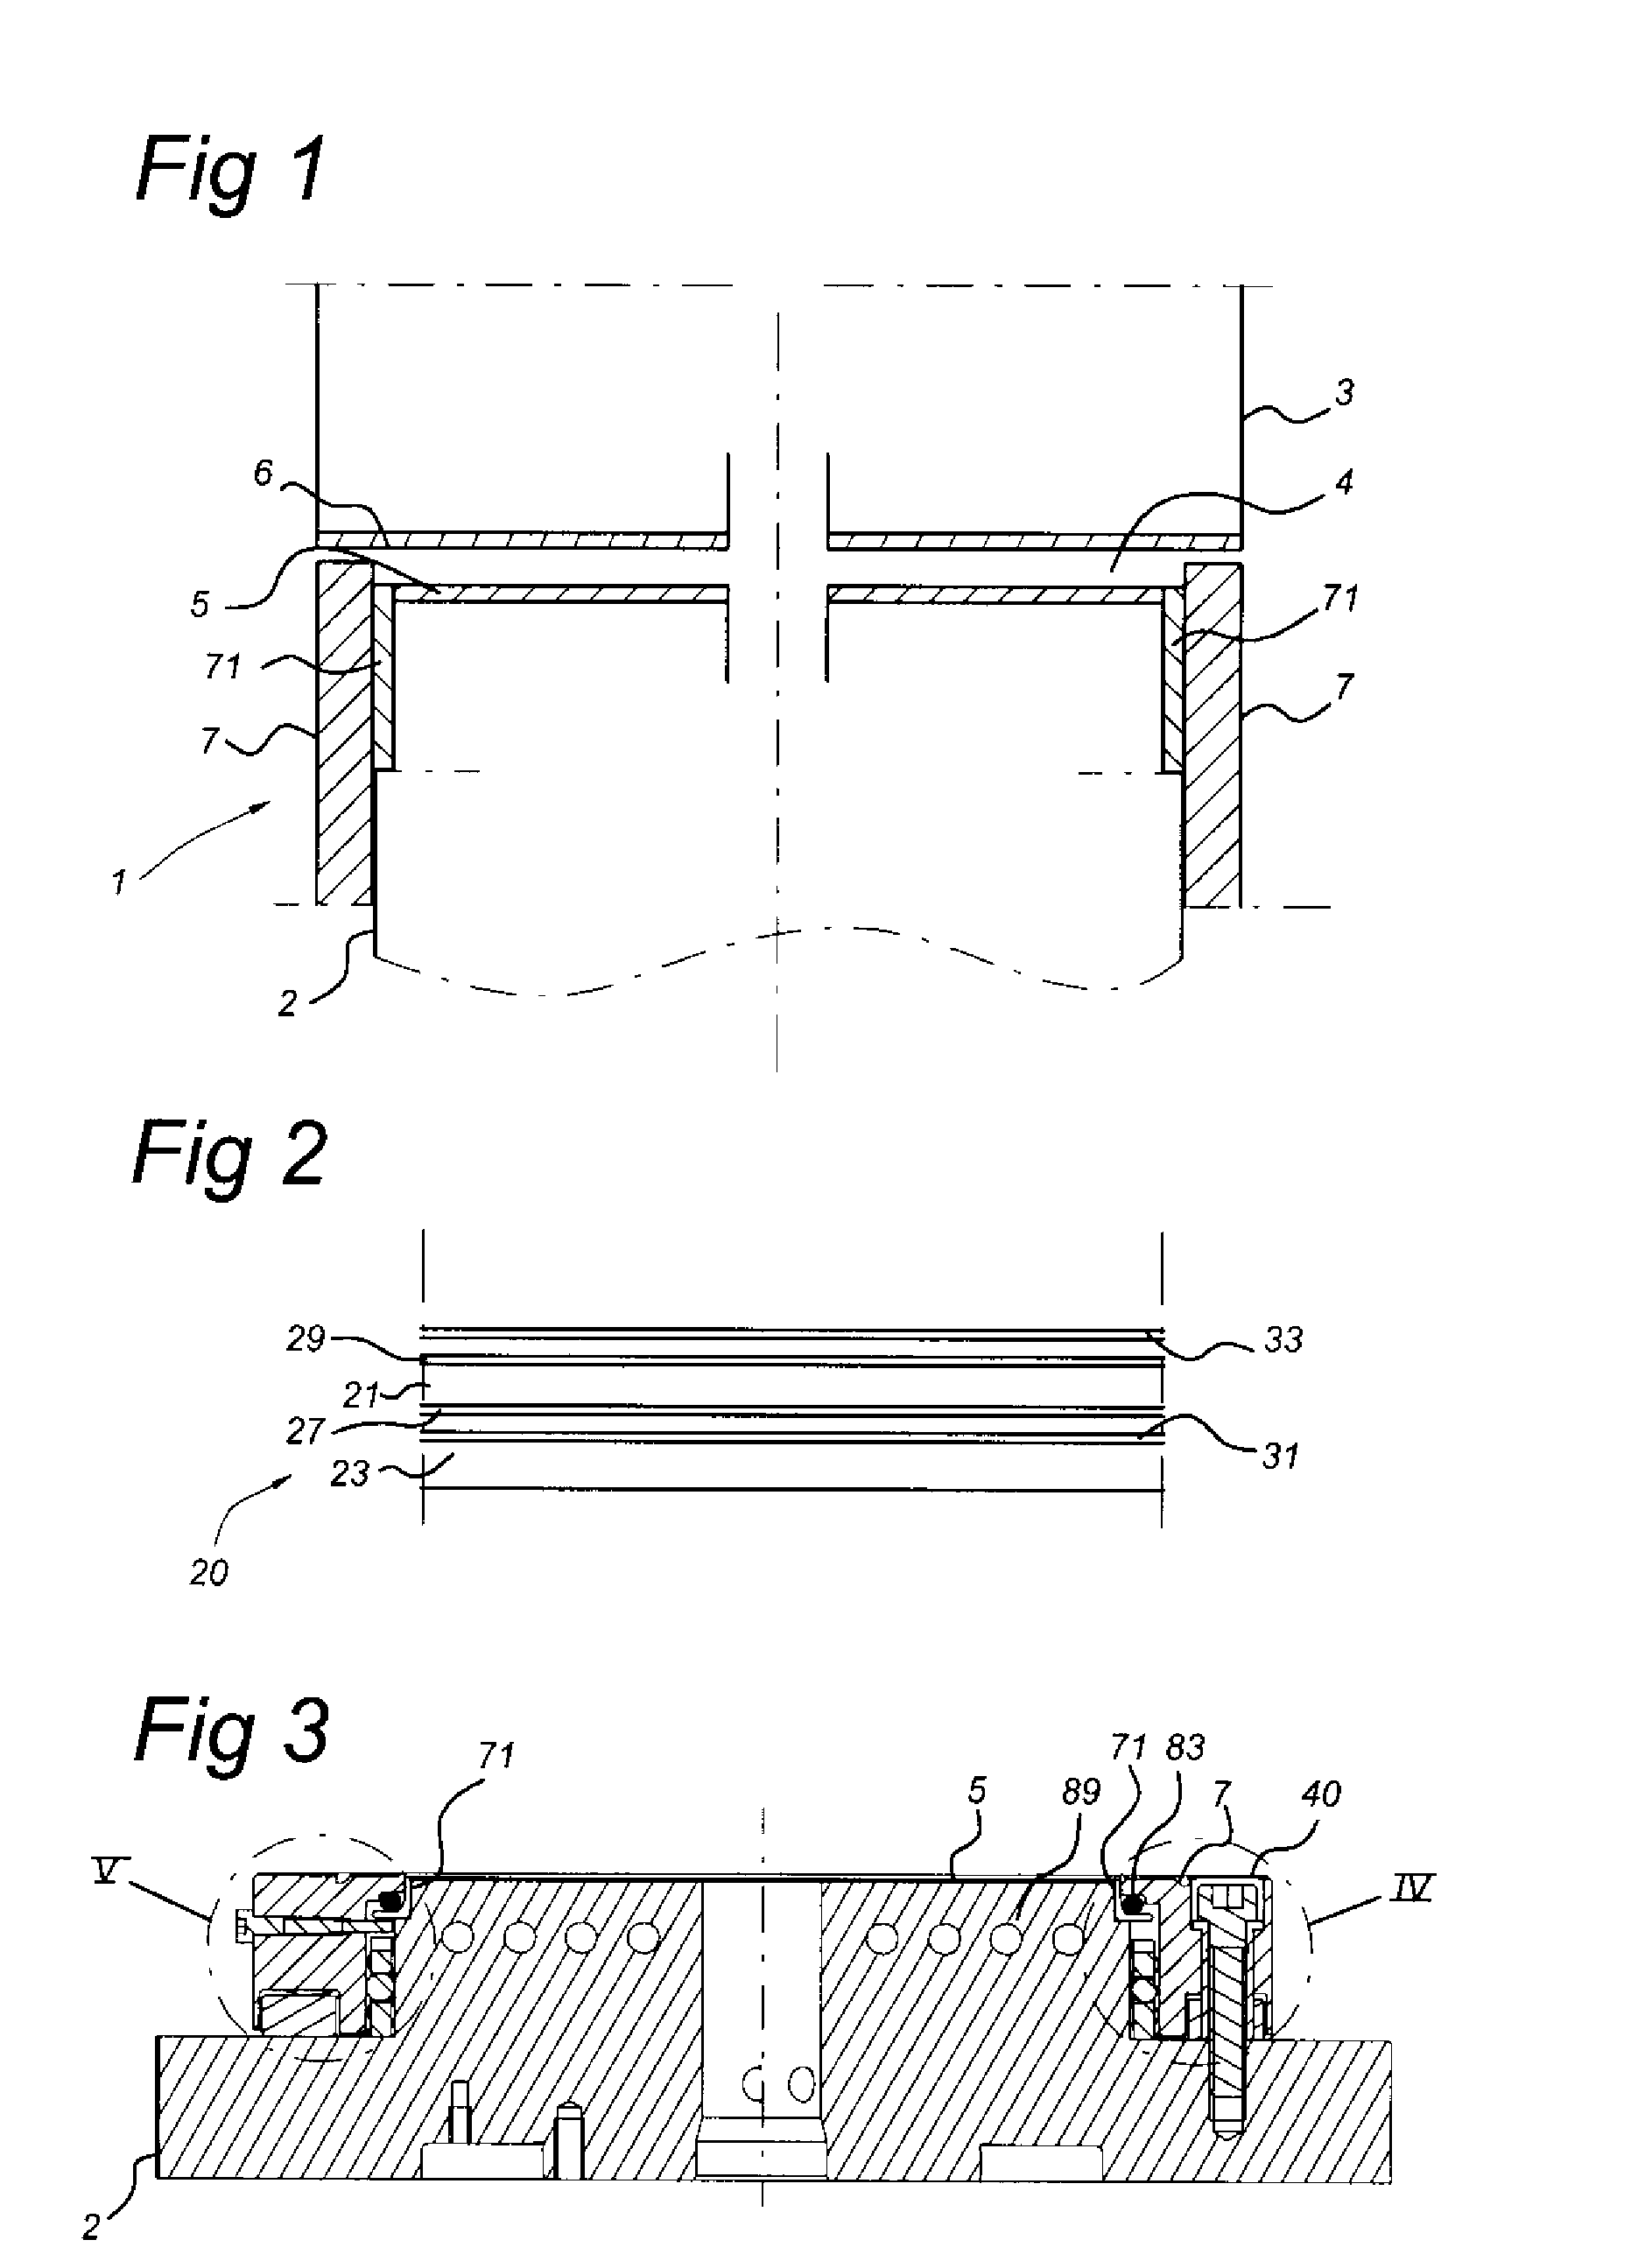 Die stamper assembly, injection compression moulding apparatus and method of manufacturing optical data carriers